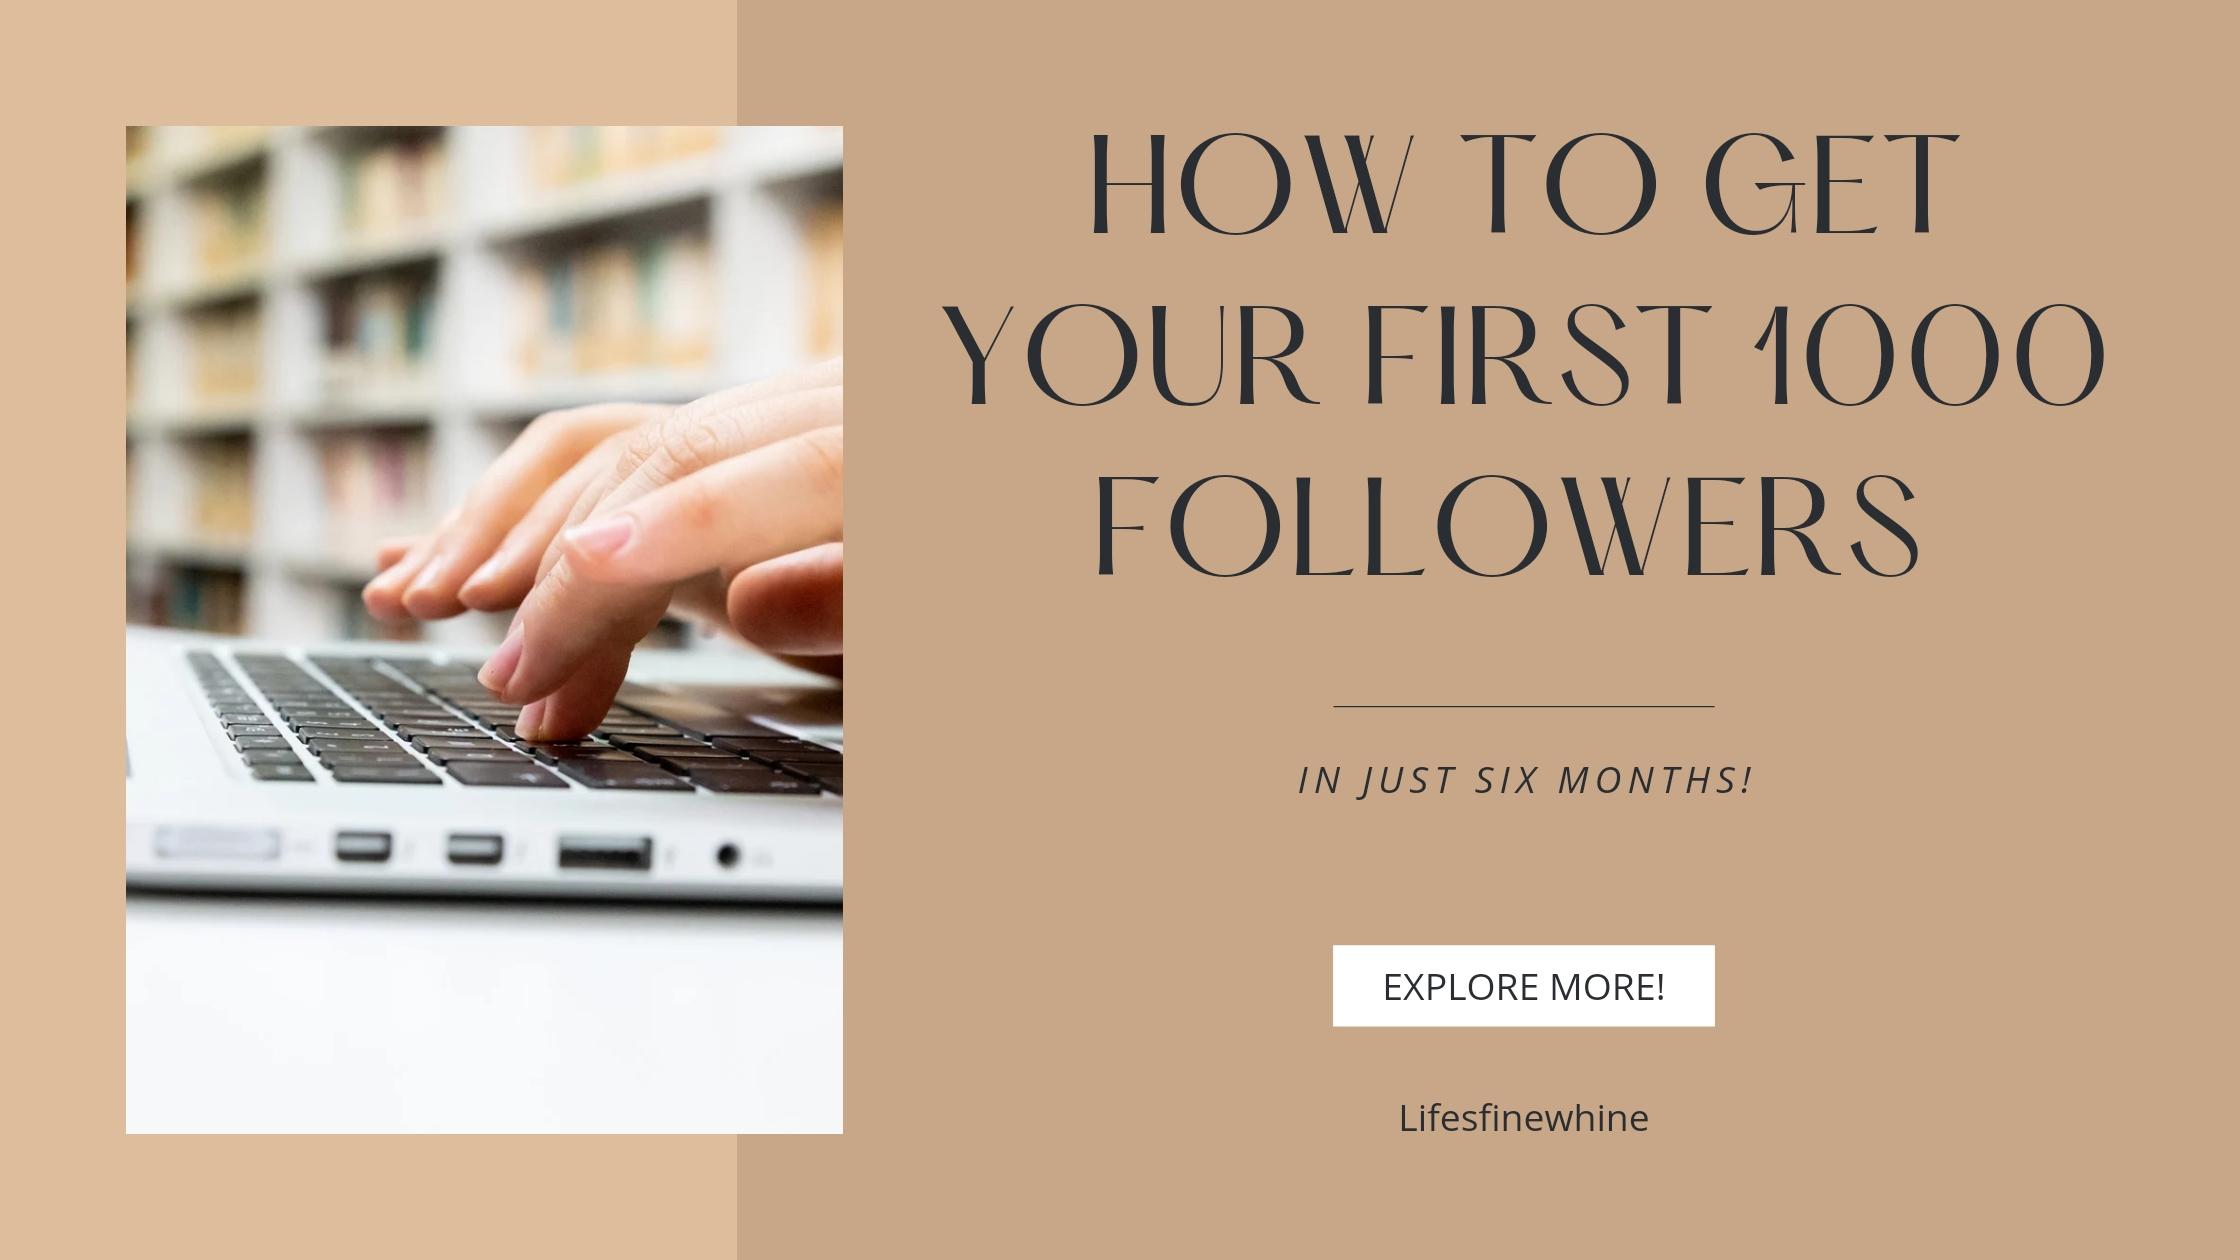 How To Get Your First 1000 Followers In 6 Months